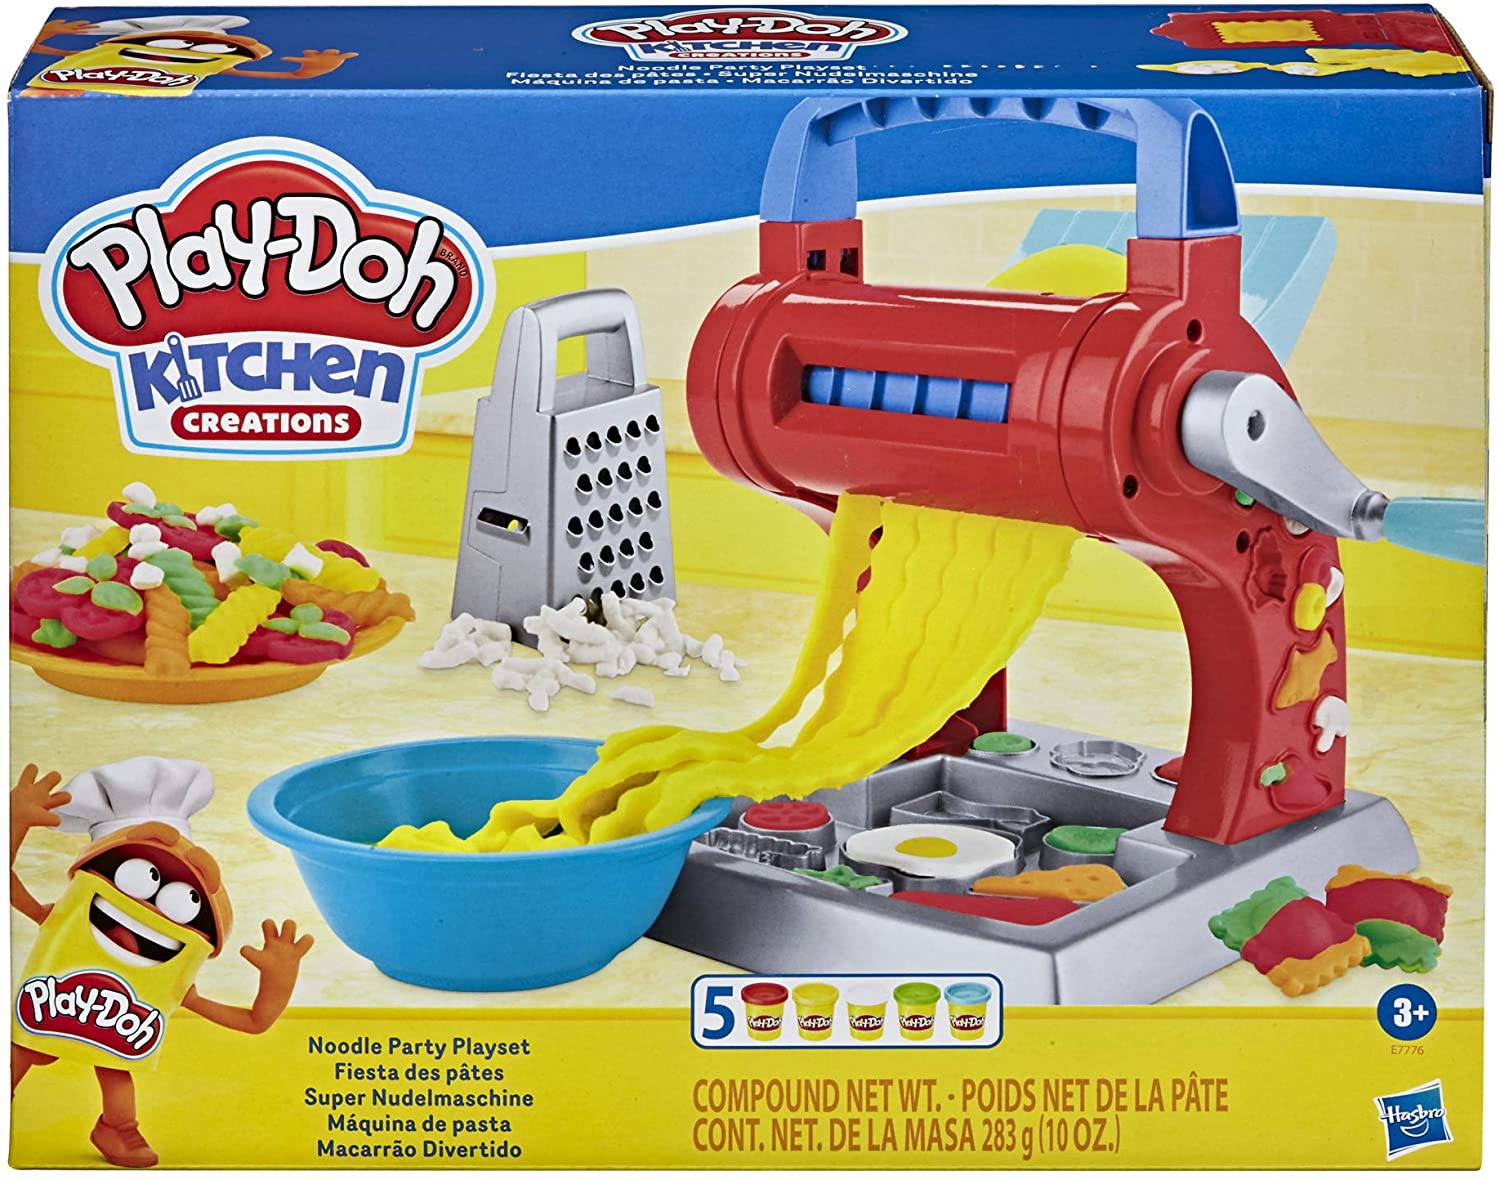 Playdoh Kitchen Creations Noodles Party Playset - Albagame